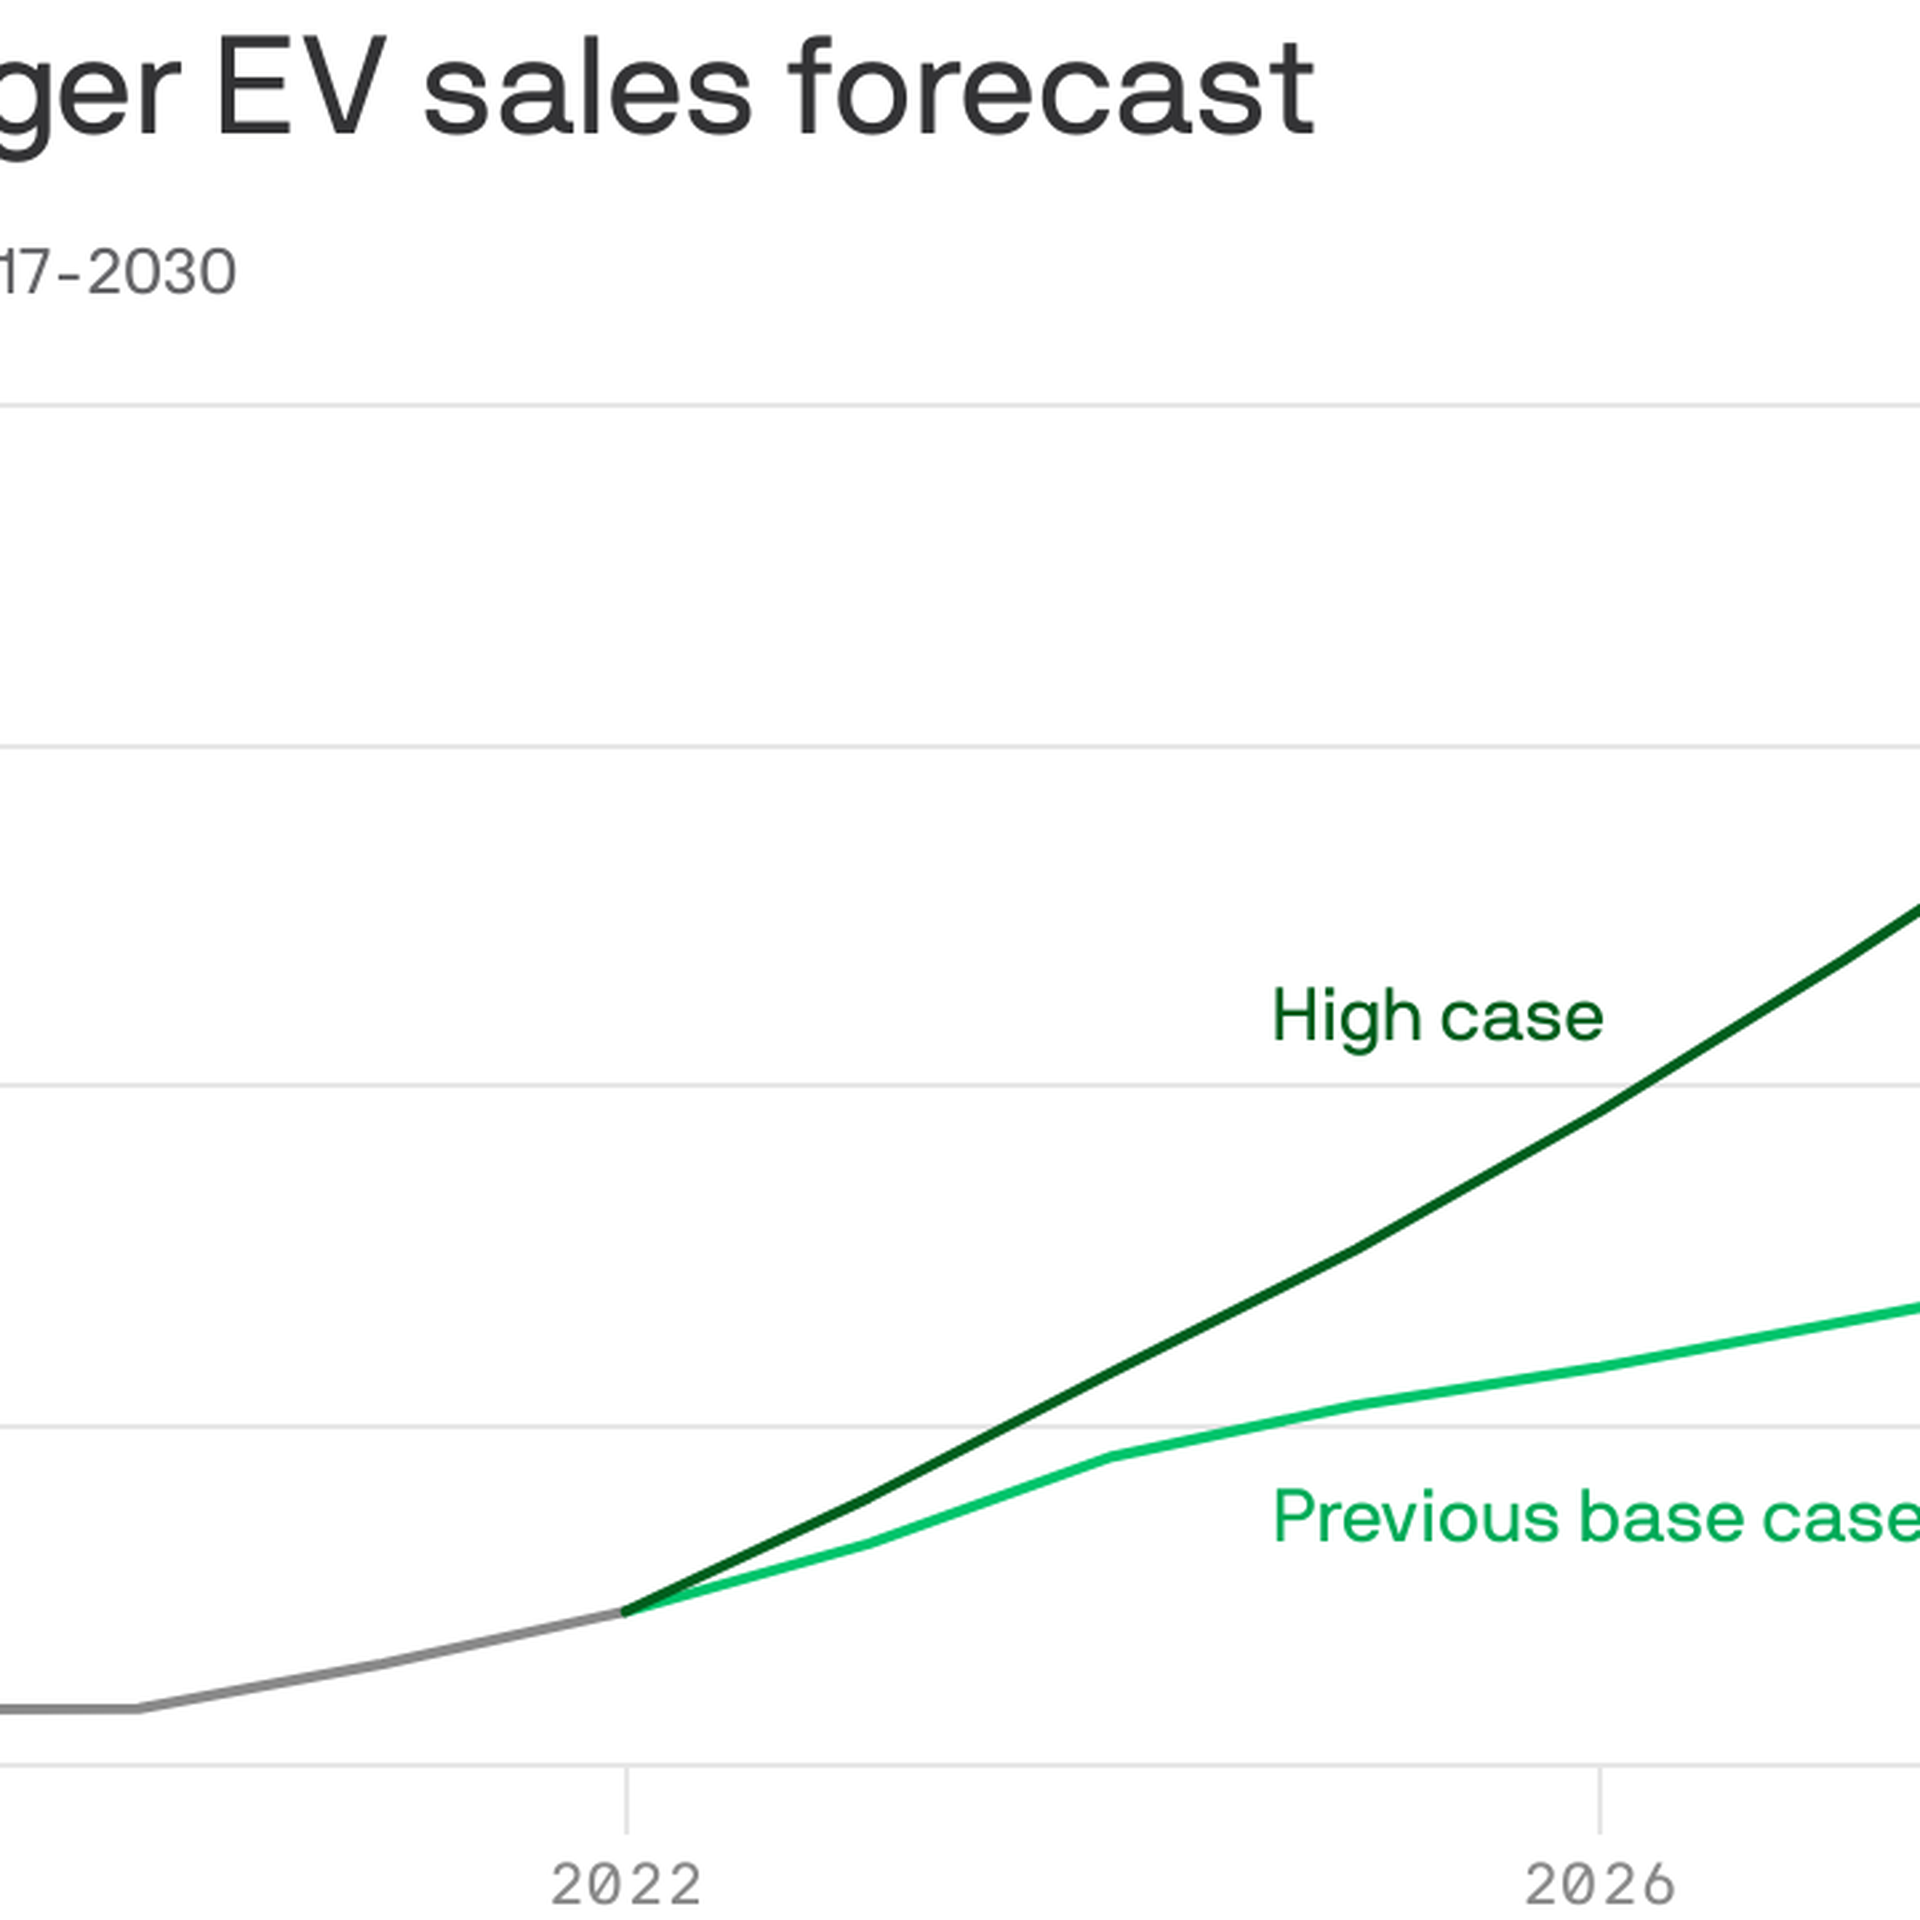 Chart of U.S. passenger EV sales forecast from 2017-2030